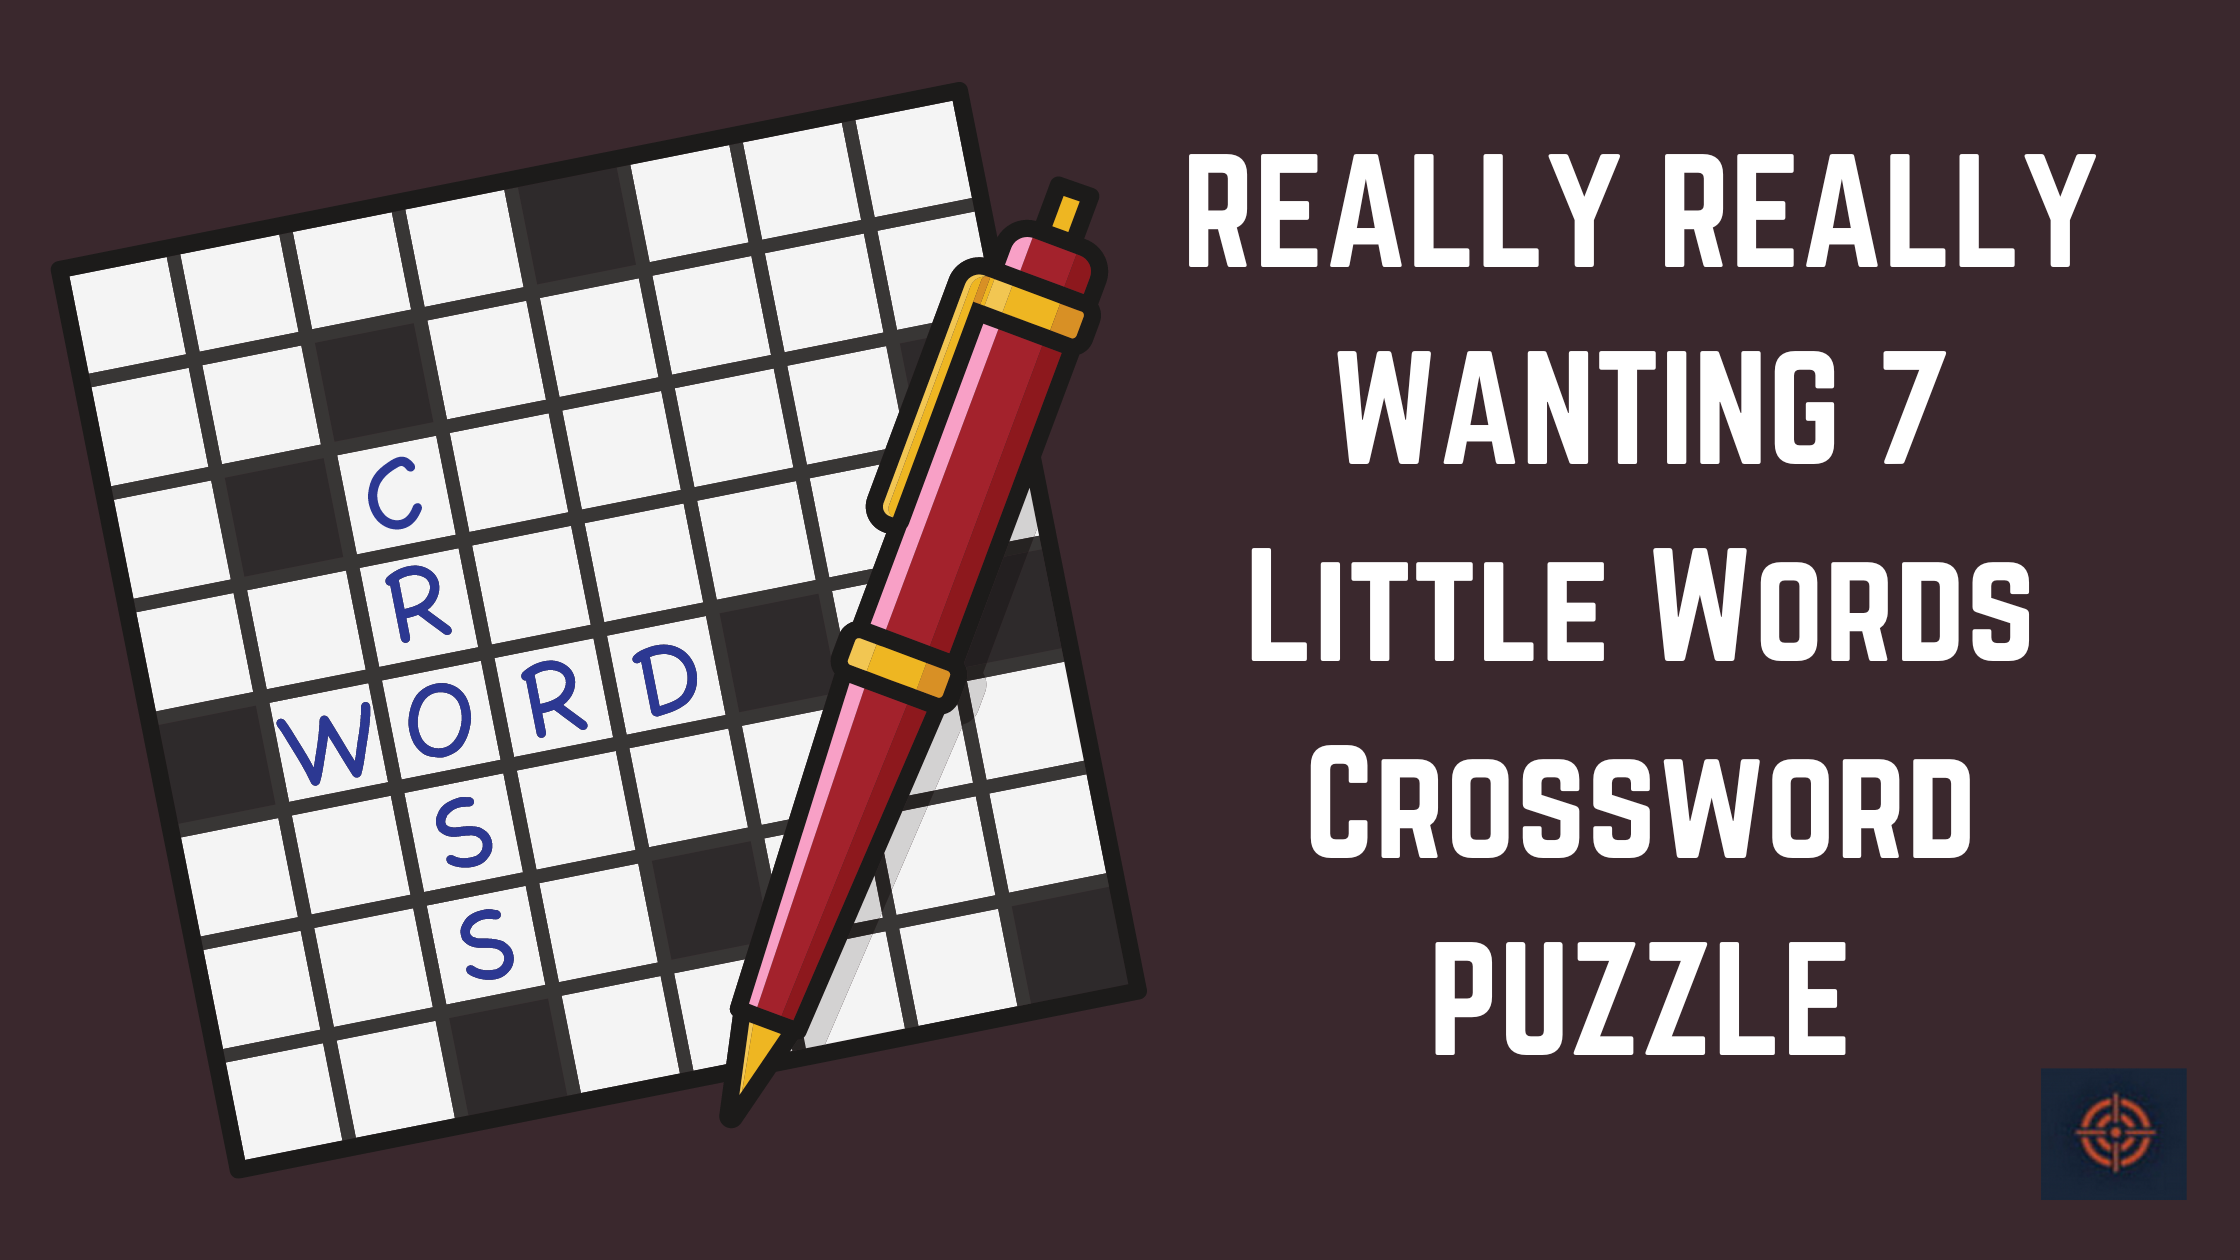 REALLY REALLY WANTING 7 Little Words Crossword